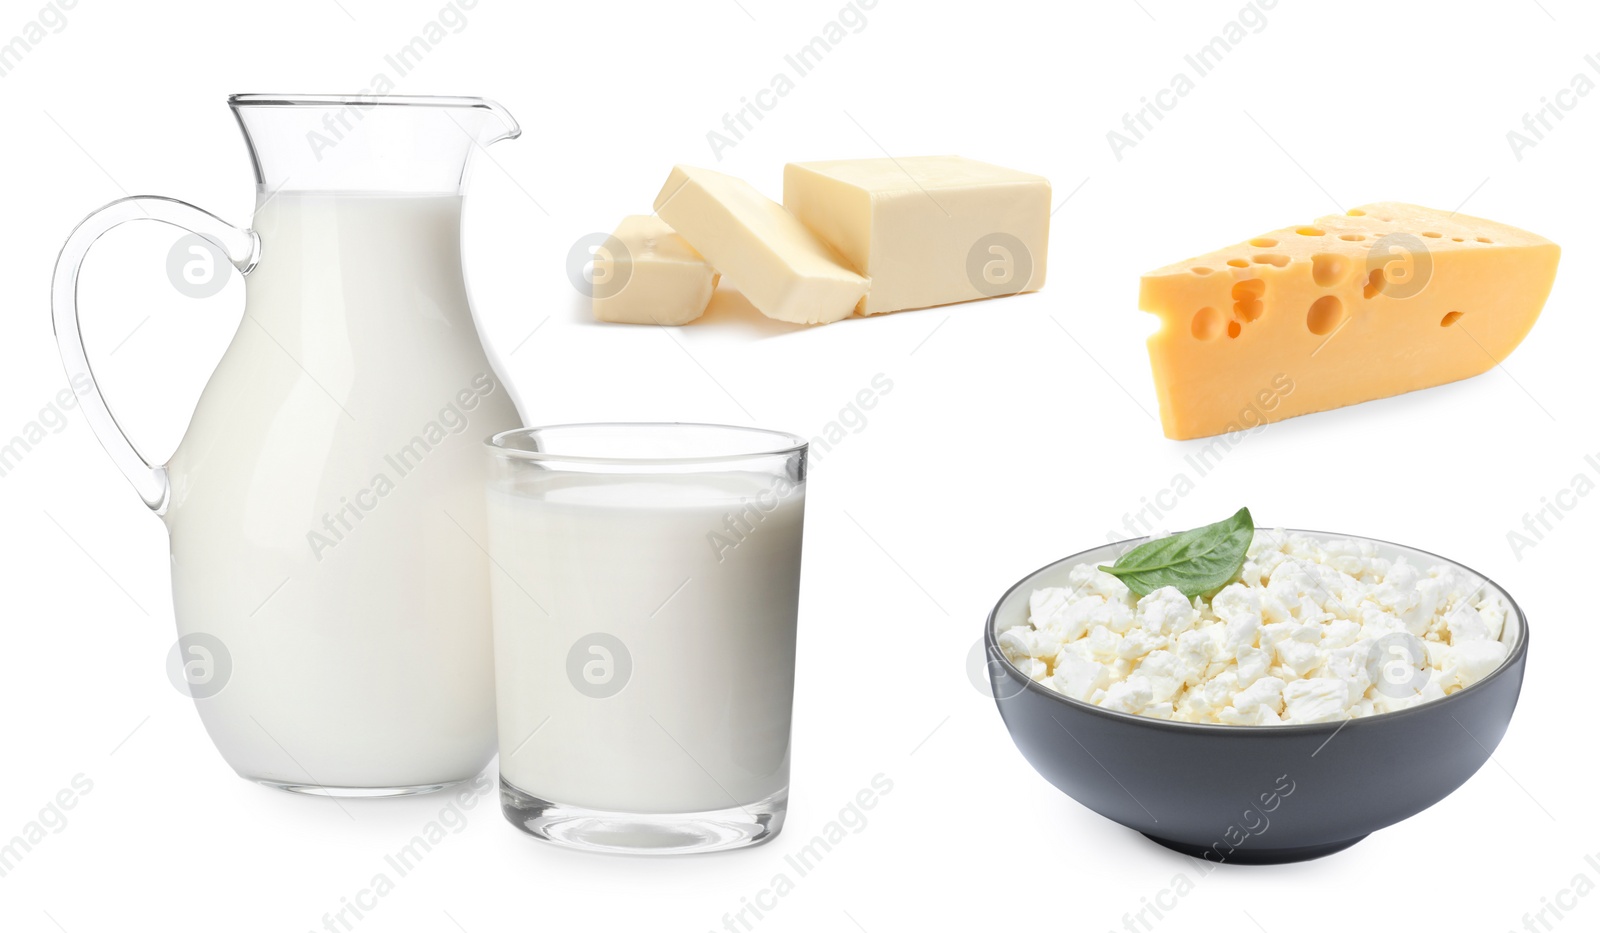 Image of Healthy diet. Collage with different dairy products on white background